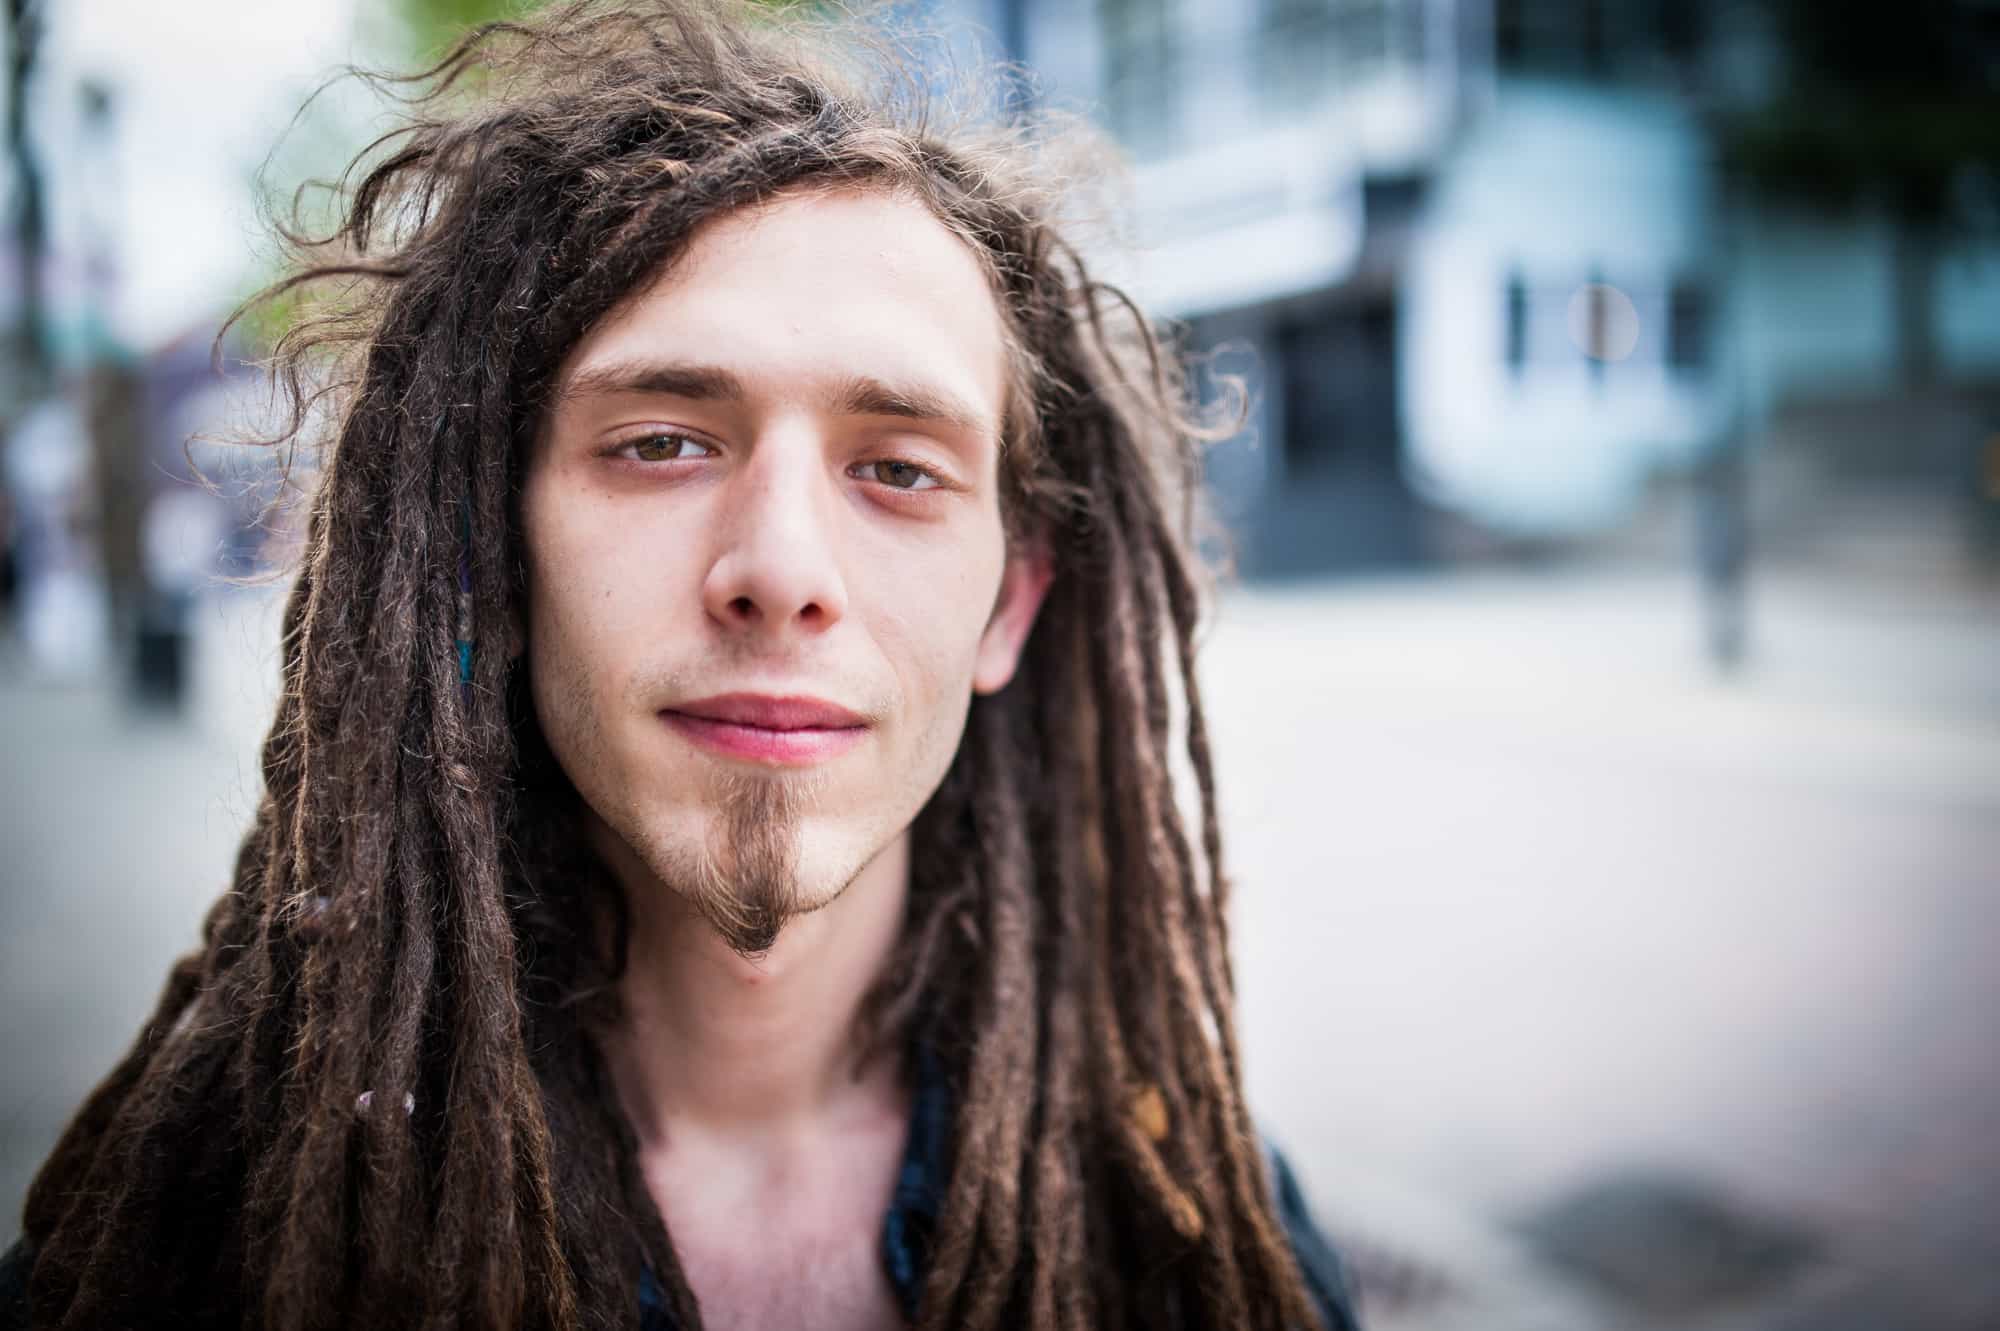 A young man with dreads and goatee is photographed on George Street in Newfoundland.